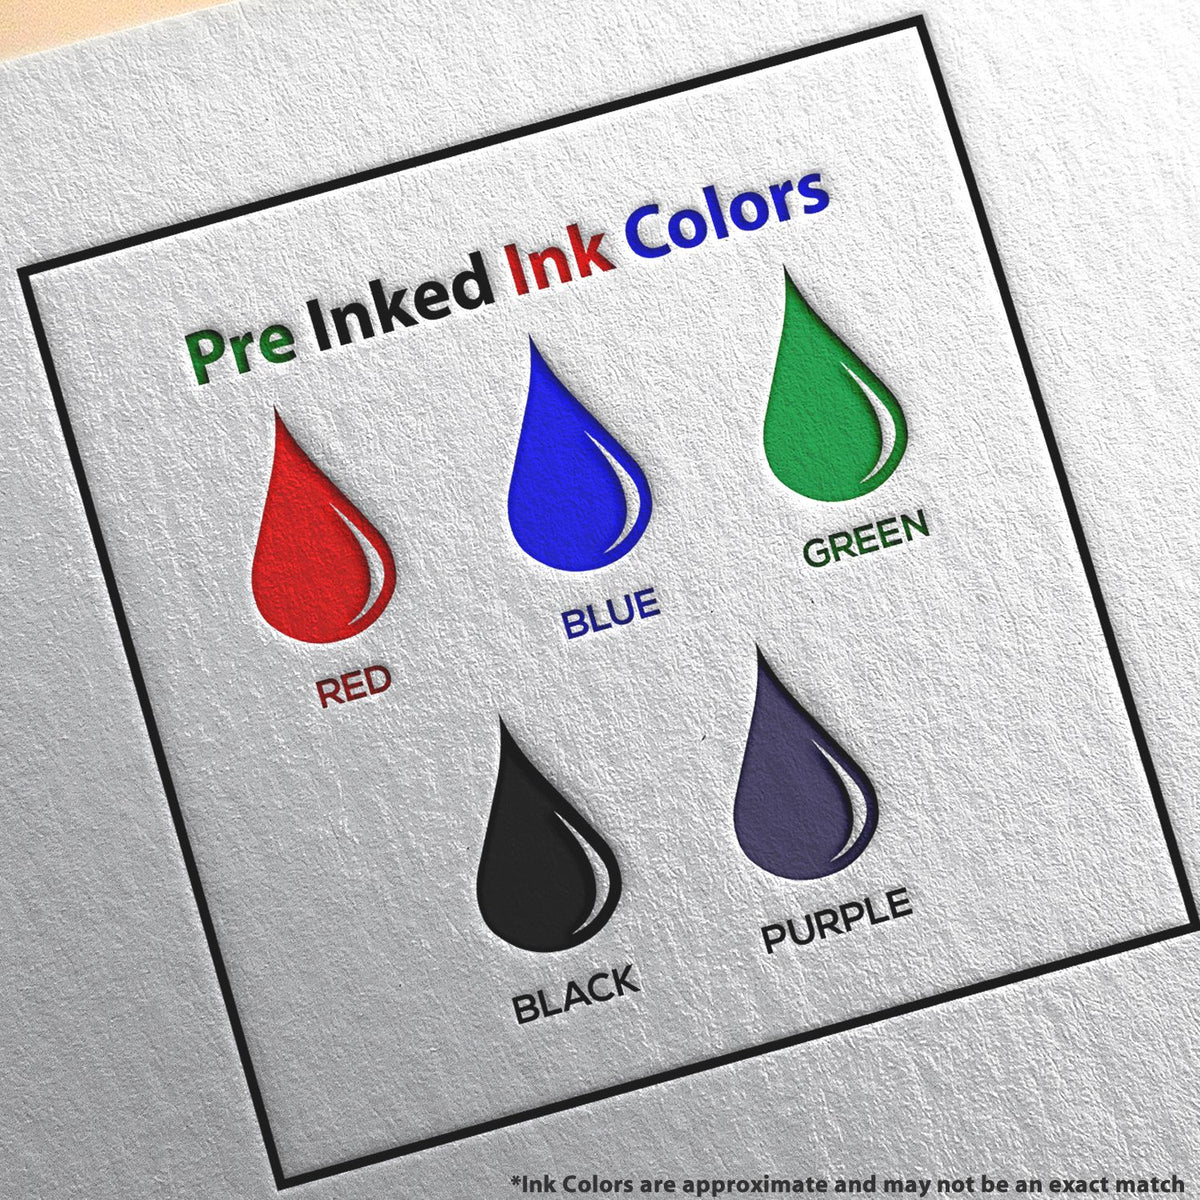 A picture showing the different ink colors or hues available for the Super Slim Mississippi Notary Public Stamp product.